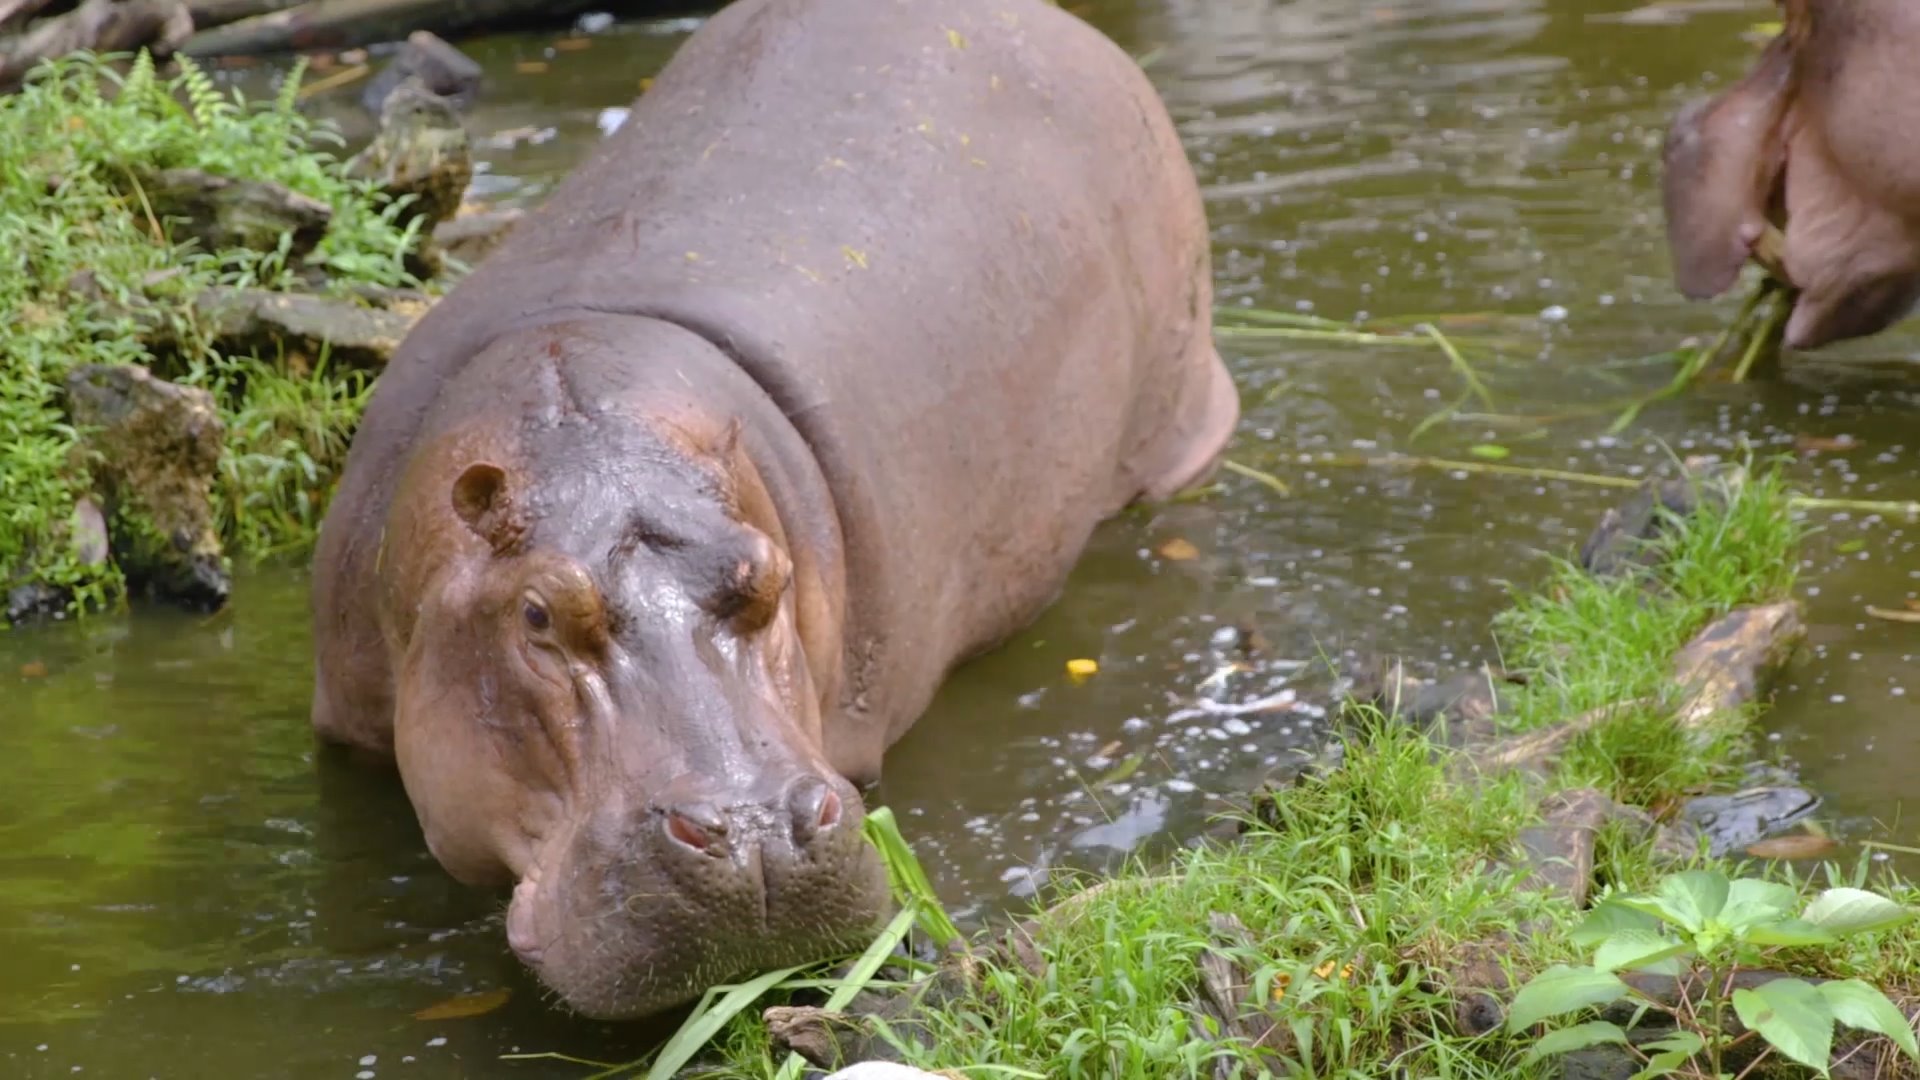 Suzie the hippo, S'pore zoo pioneer who arrived in 1976, dies at 44 -  Mothership.SG - News from Singapore, Asia and around the world